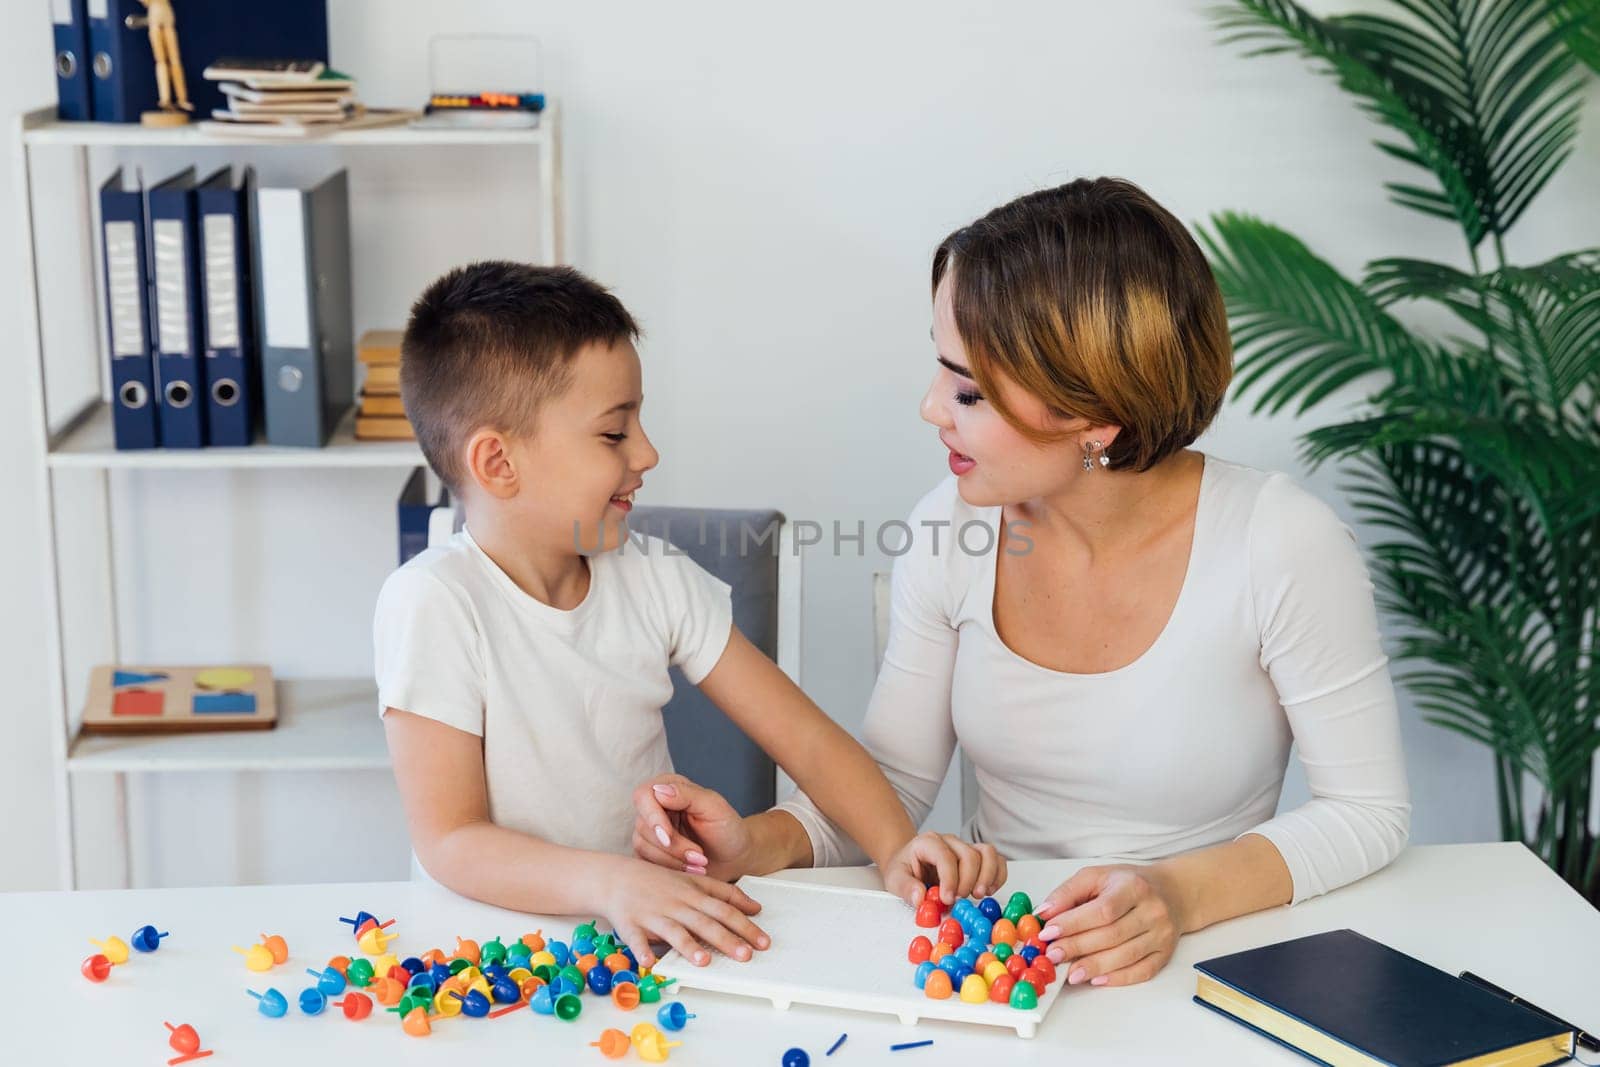 in the psychologist's office educational games work with the child fine motor skills mosaic